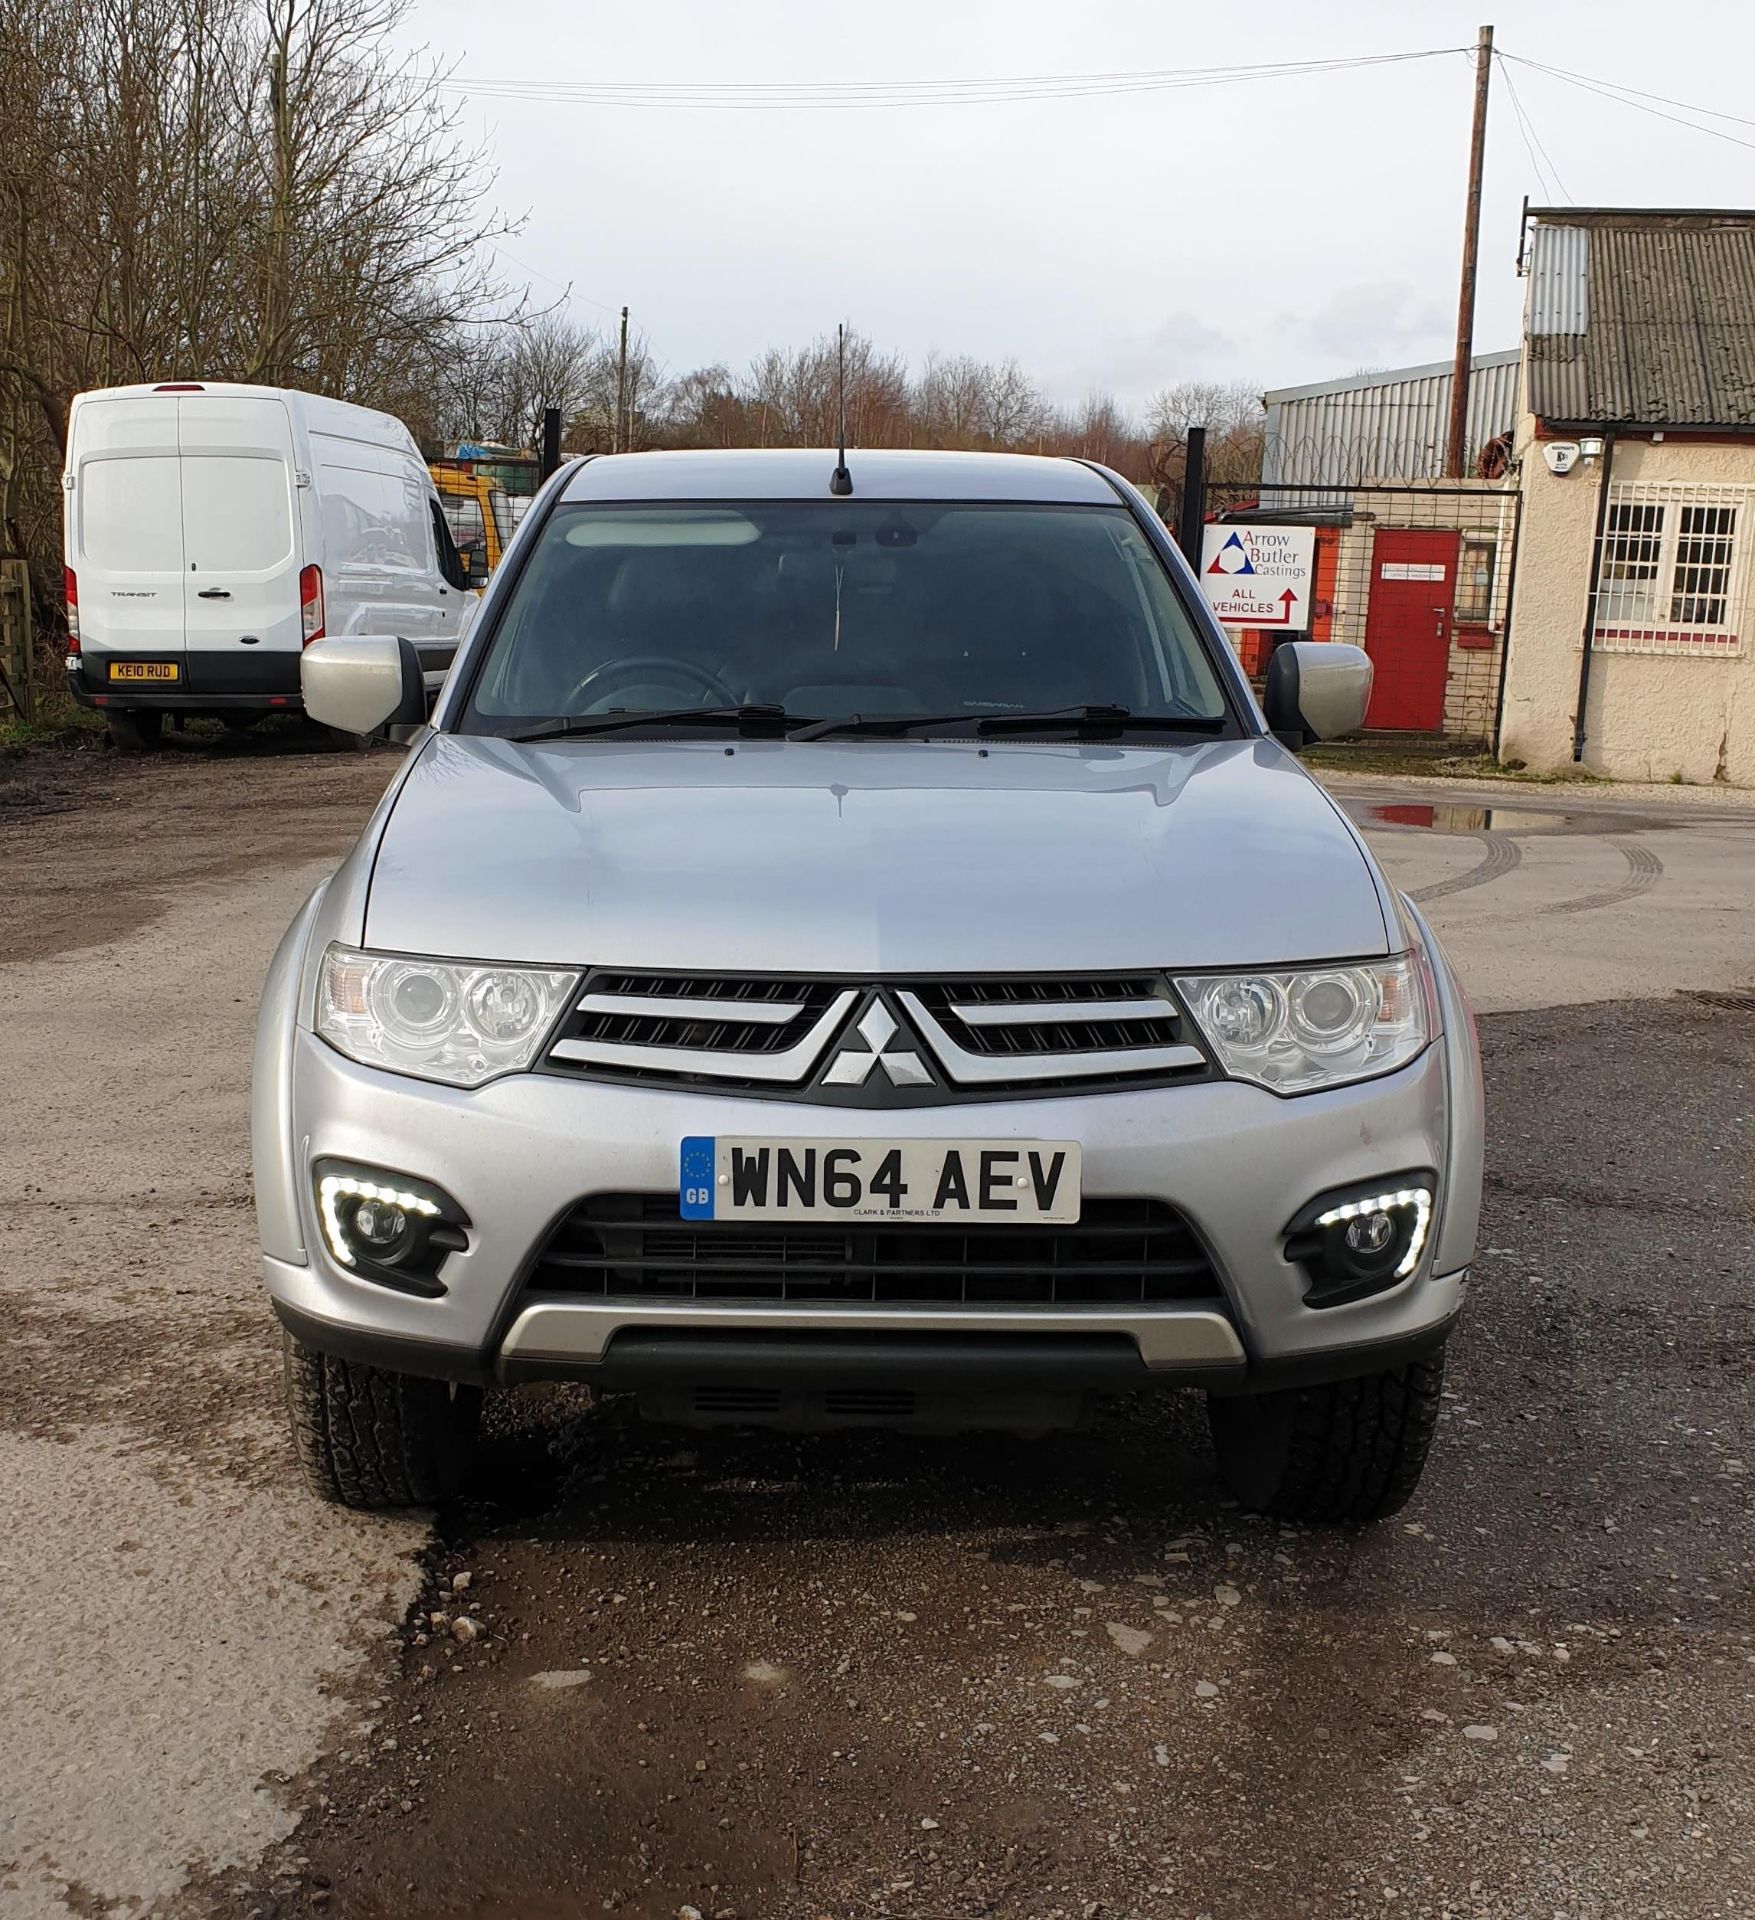 Mitsubishi L200 Barbarian LB DCB DI-D 4X4 Pick Up, registration WN64 AEV, first registered 1 October - Image 2 of 7